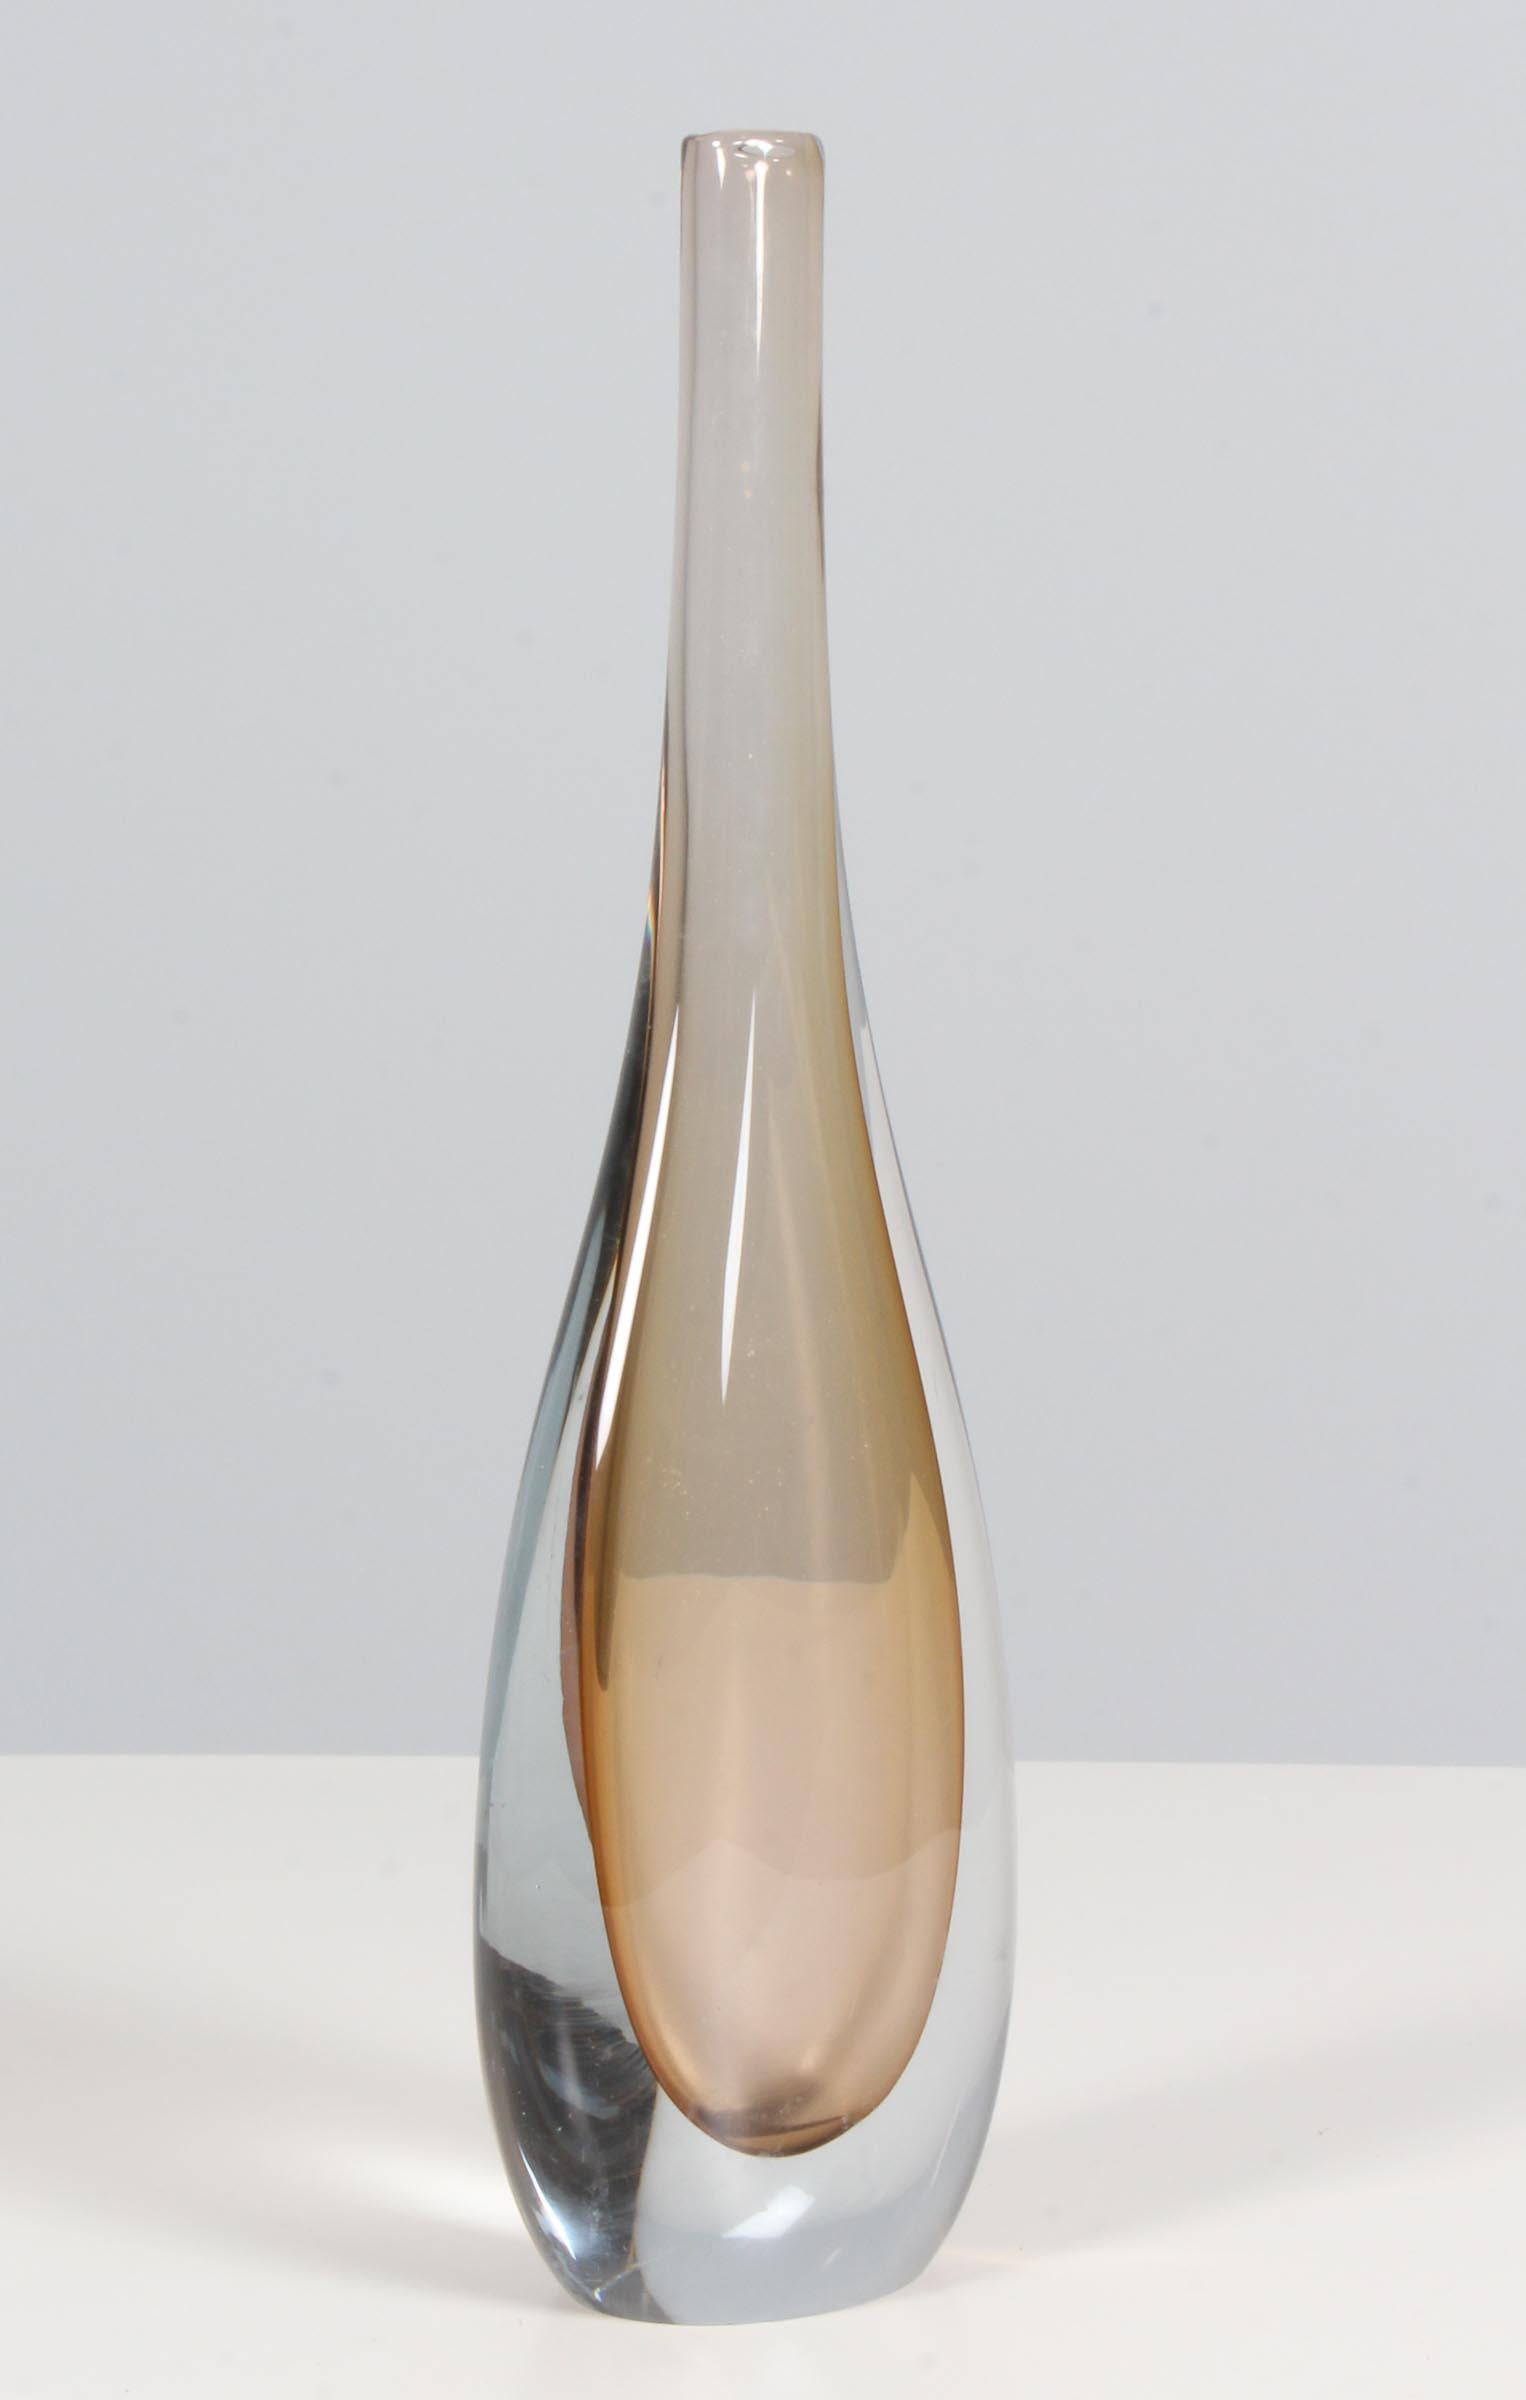 Decorative vase by Flavio Poli for Seguso Milano dating from the 1960s. The product is made of submerged Murano glass.
